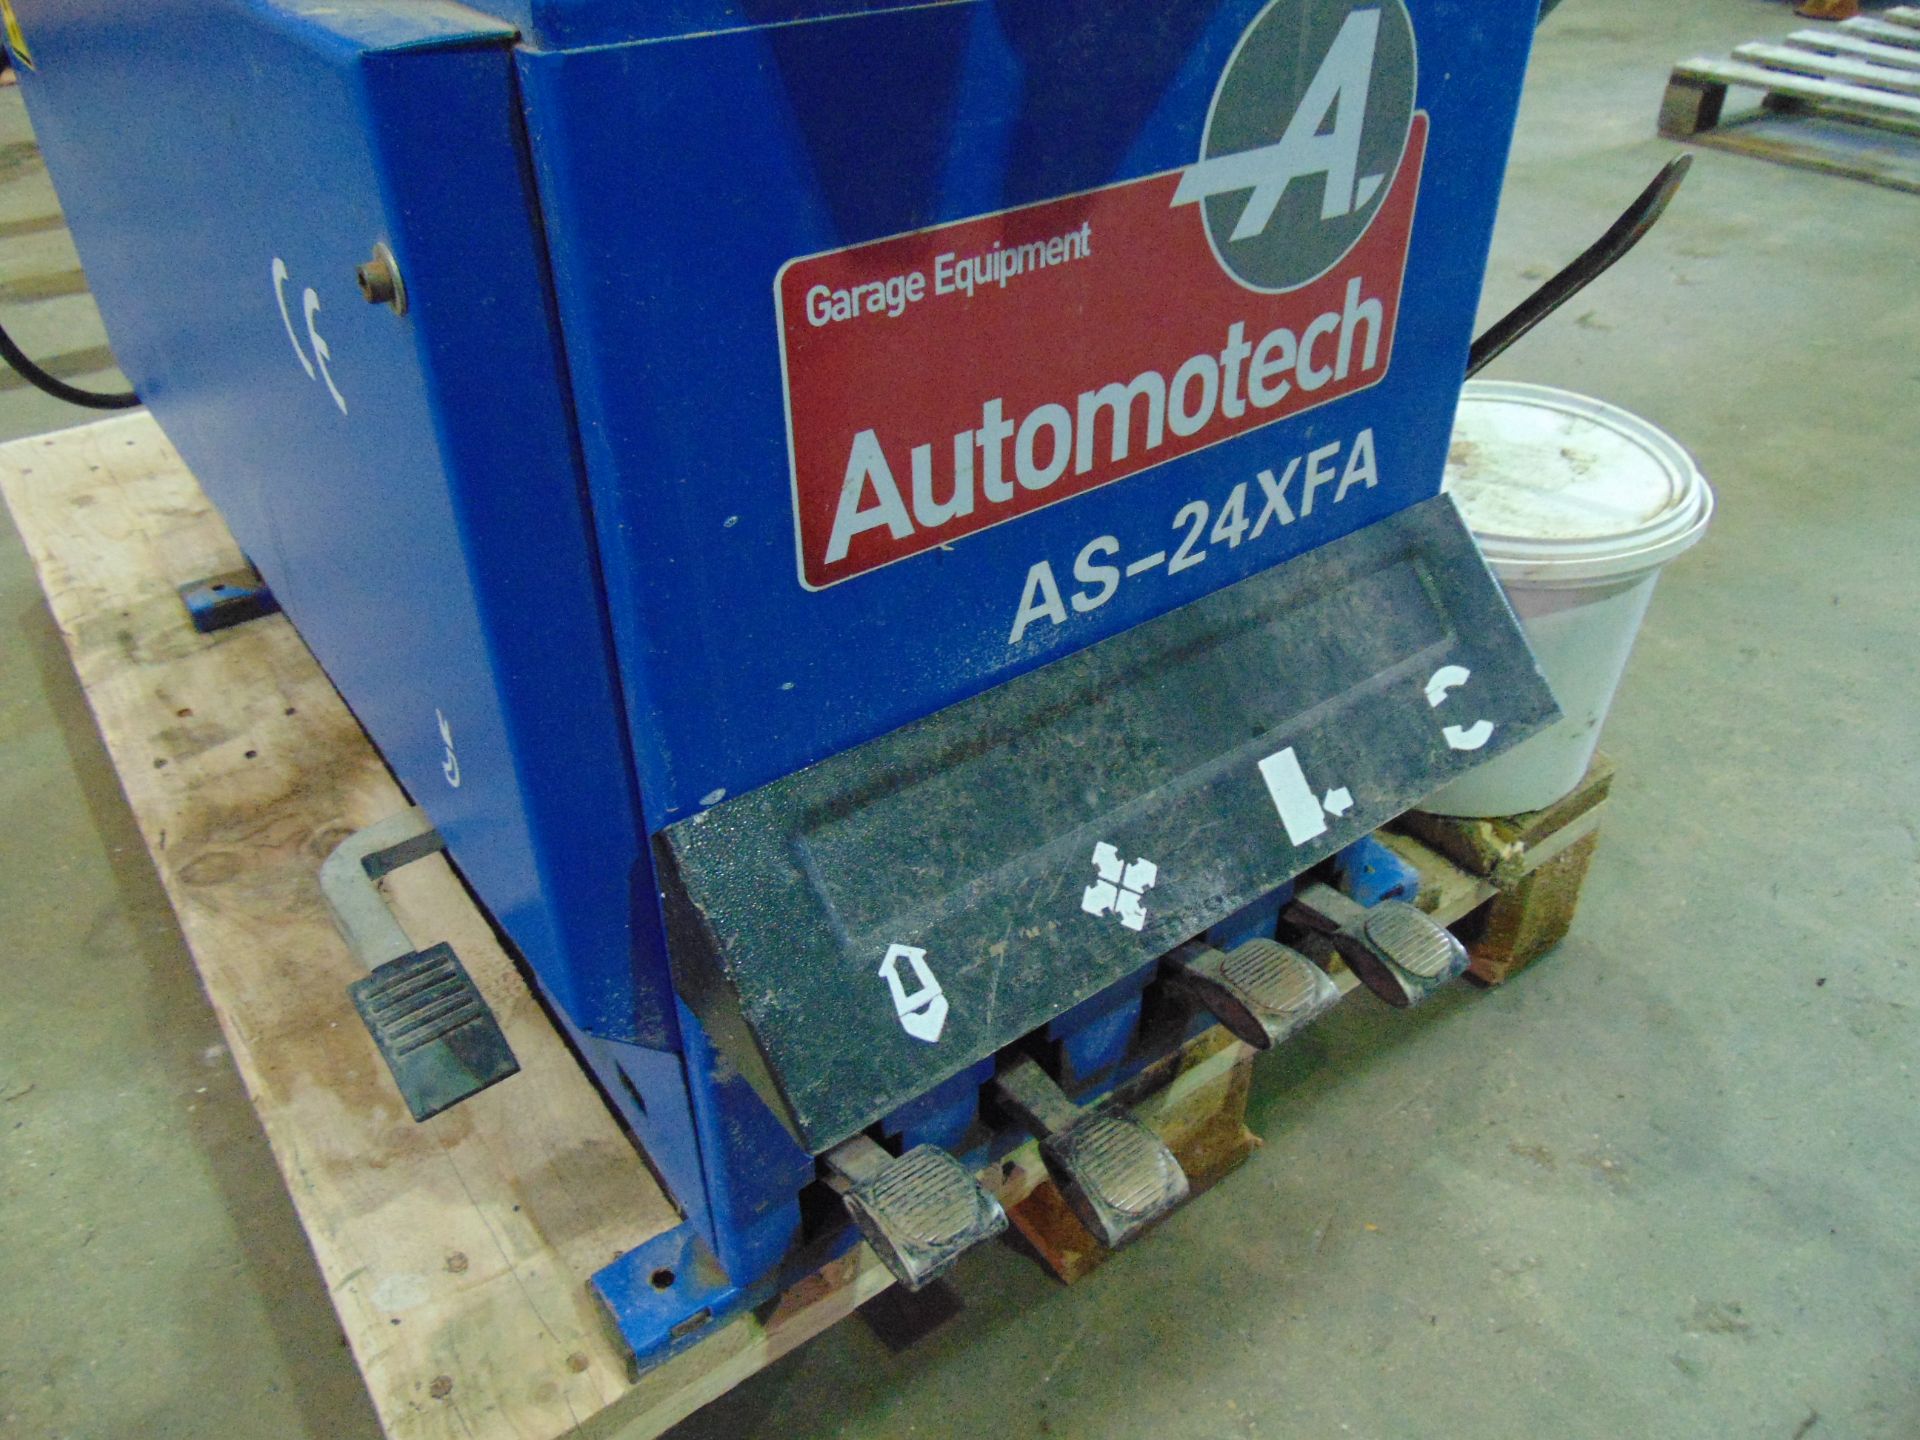 Automotech AS-24XFA Automatic Tyre Changer - Image 7 of 12